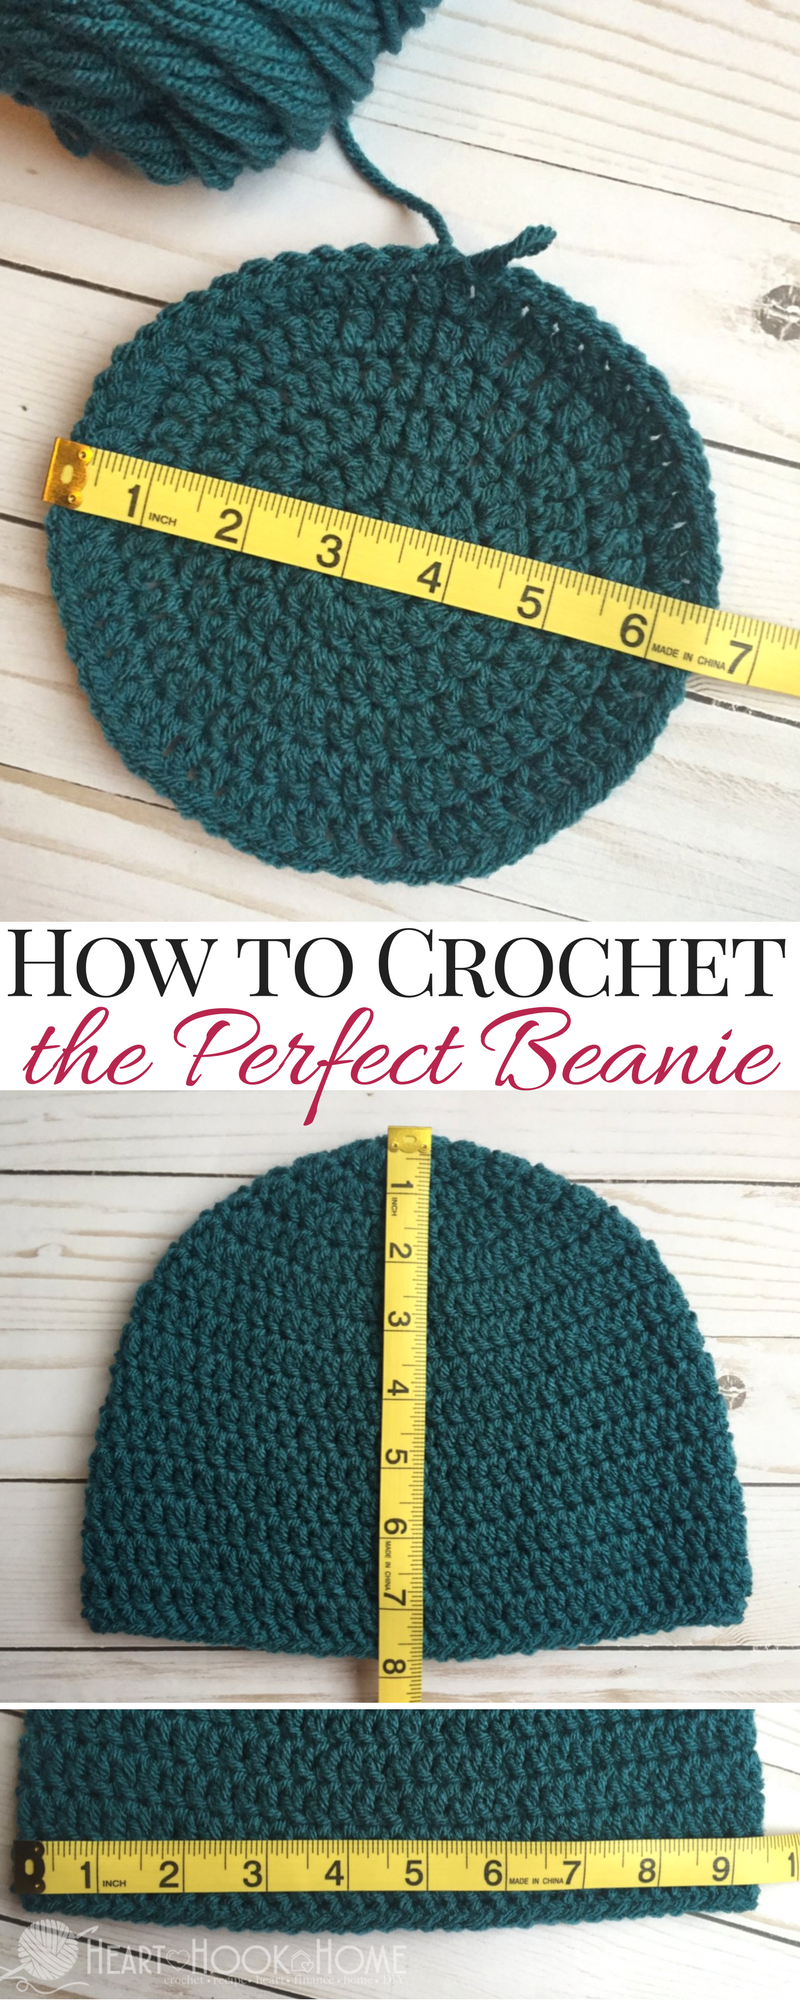 Crochet Beanie Pattern For 2 Year Old How To Size Crochet Beanies Master Beanie Crochet Pattern